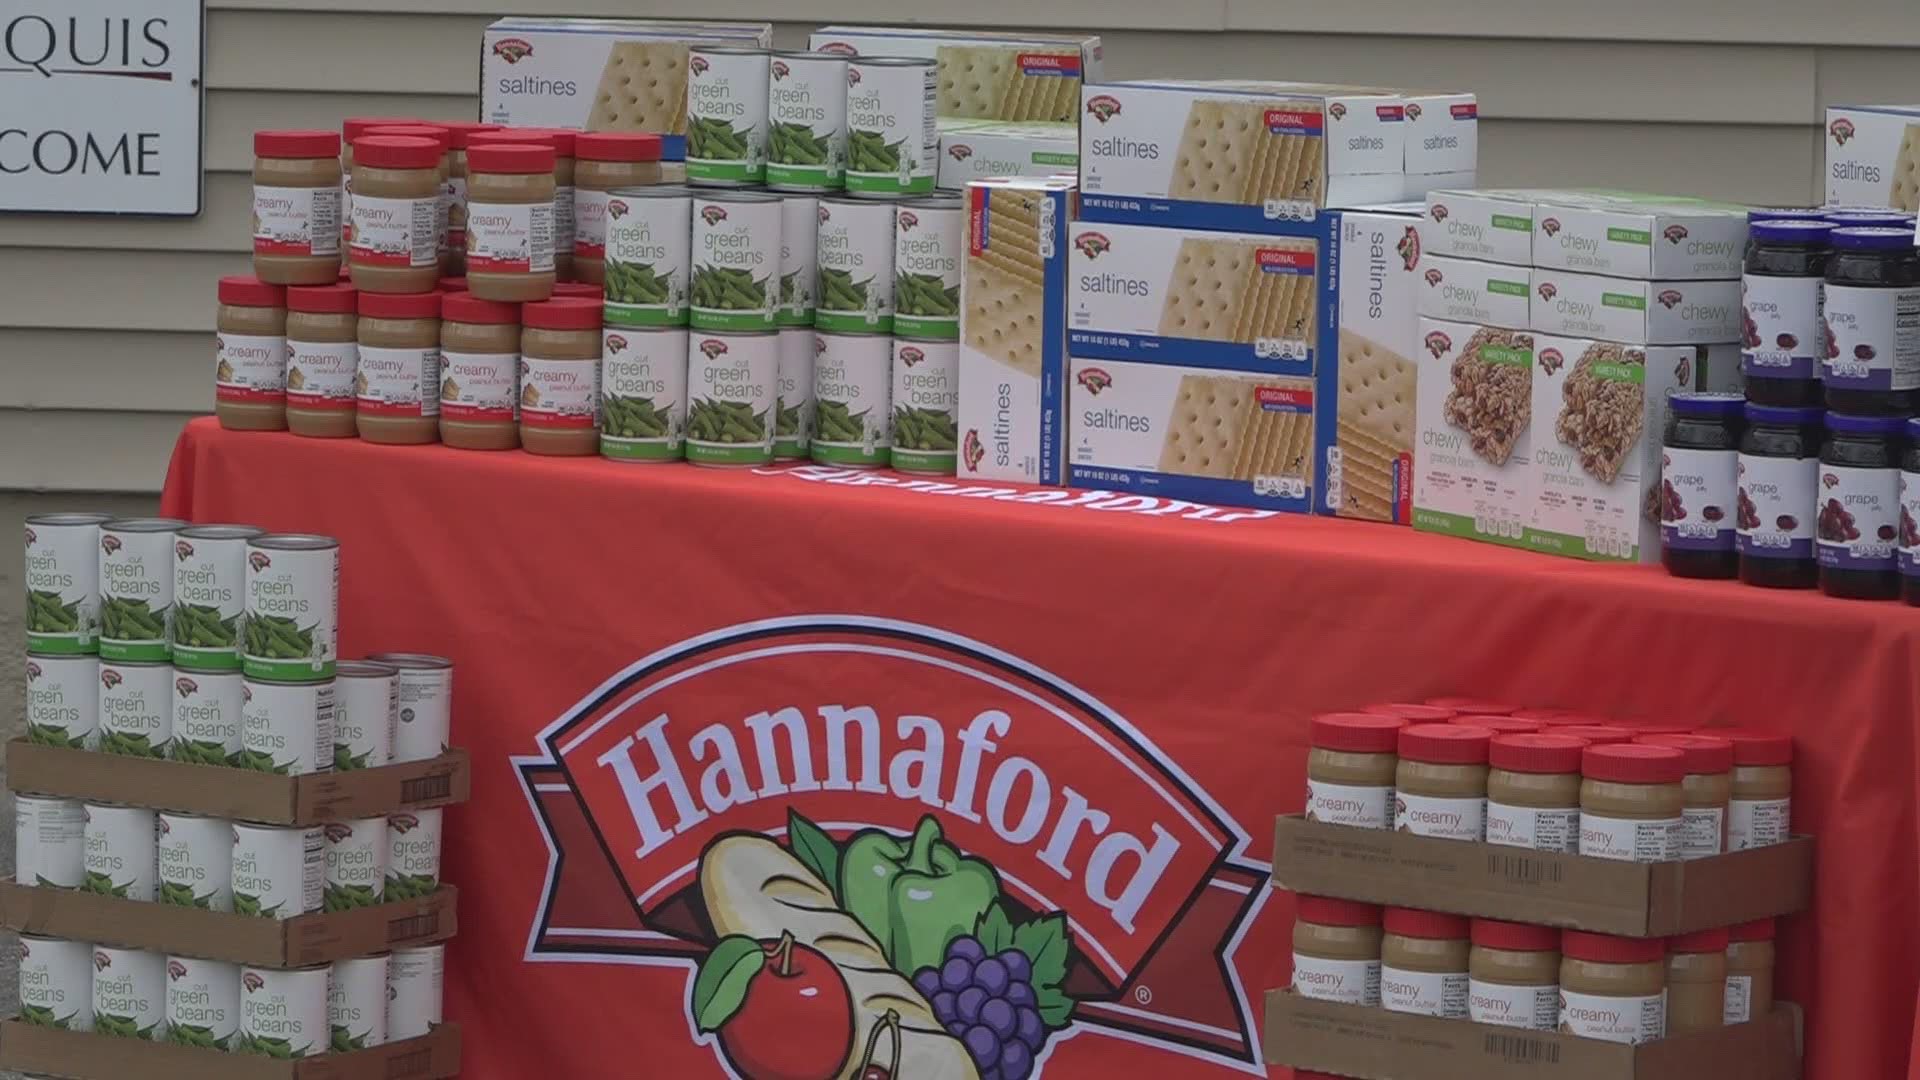 Hannaford donates $50,000 to help families deal with the coronavirus pandemic